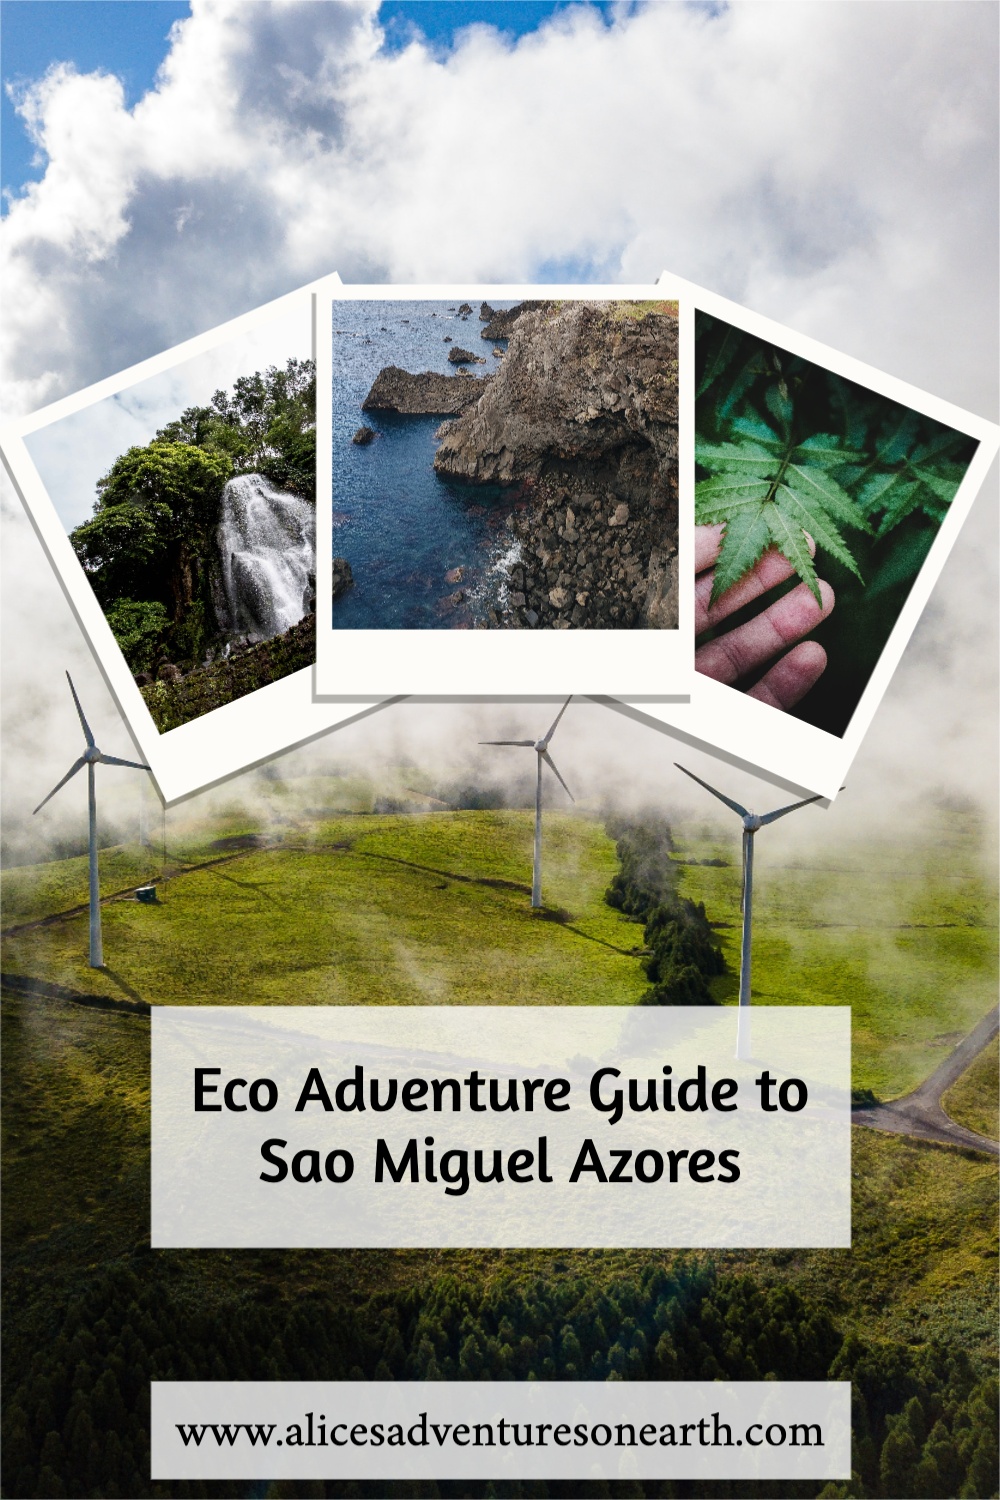 The island of Sao Miguel in the Azores has hot springs, hiking, tra plantations, whale watching and lots of adventure. Here are some of the best eco friendly options for travel and places to stay on the island. #azores #islands #hiking 